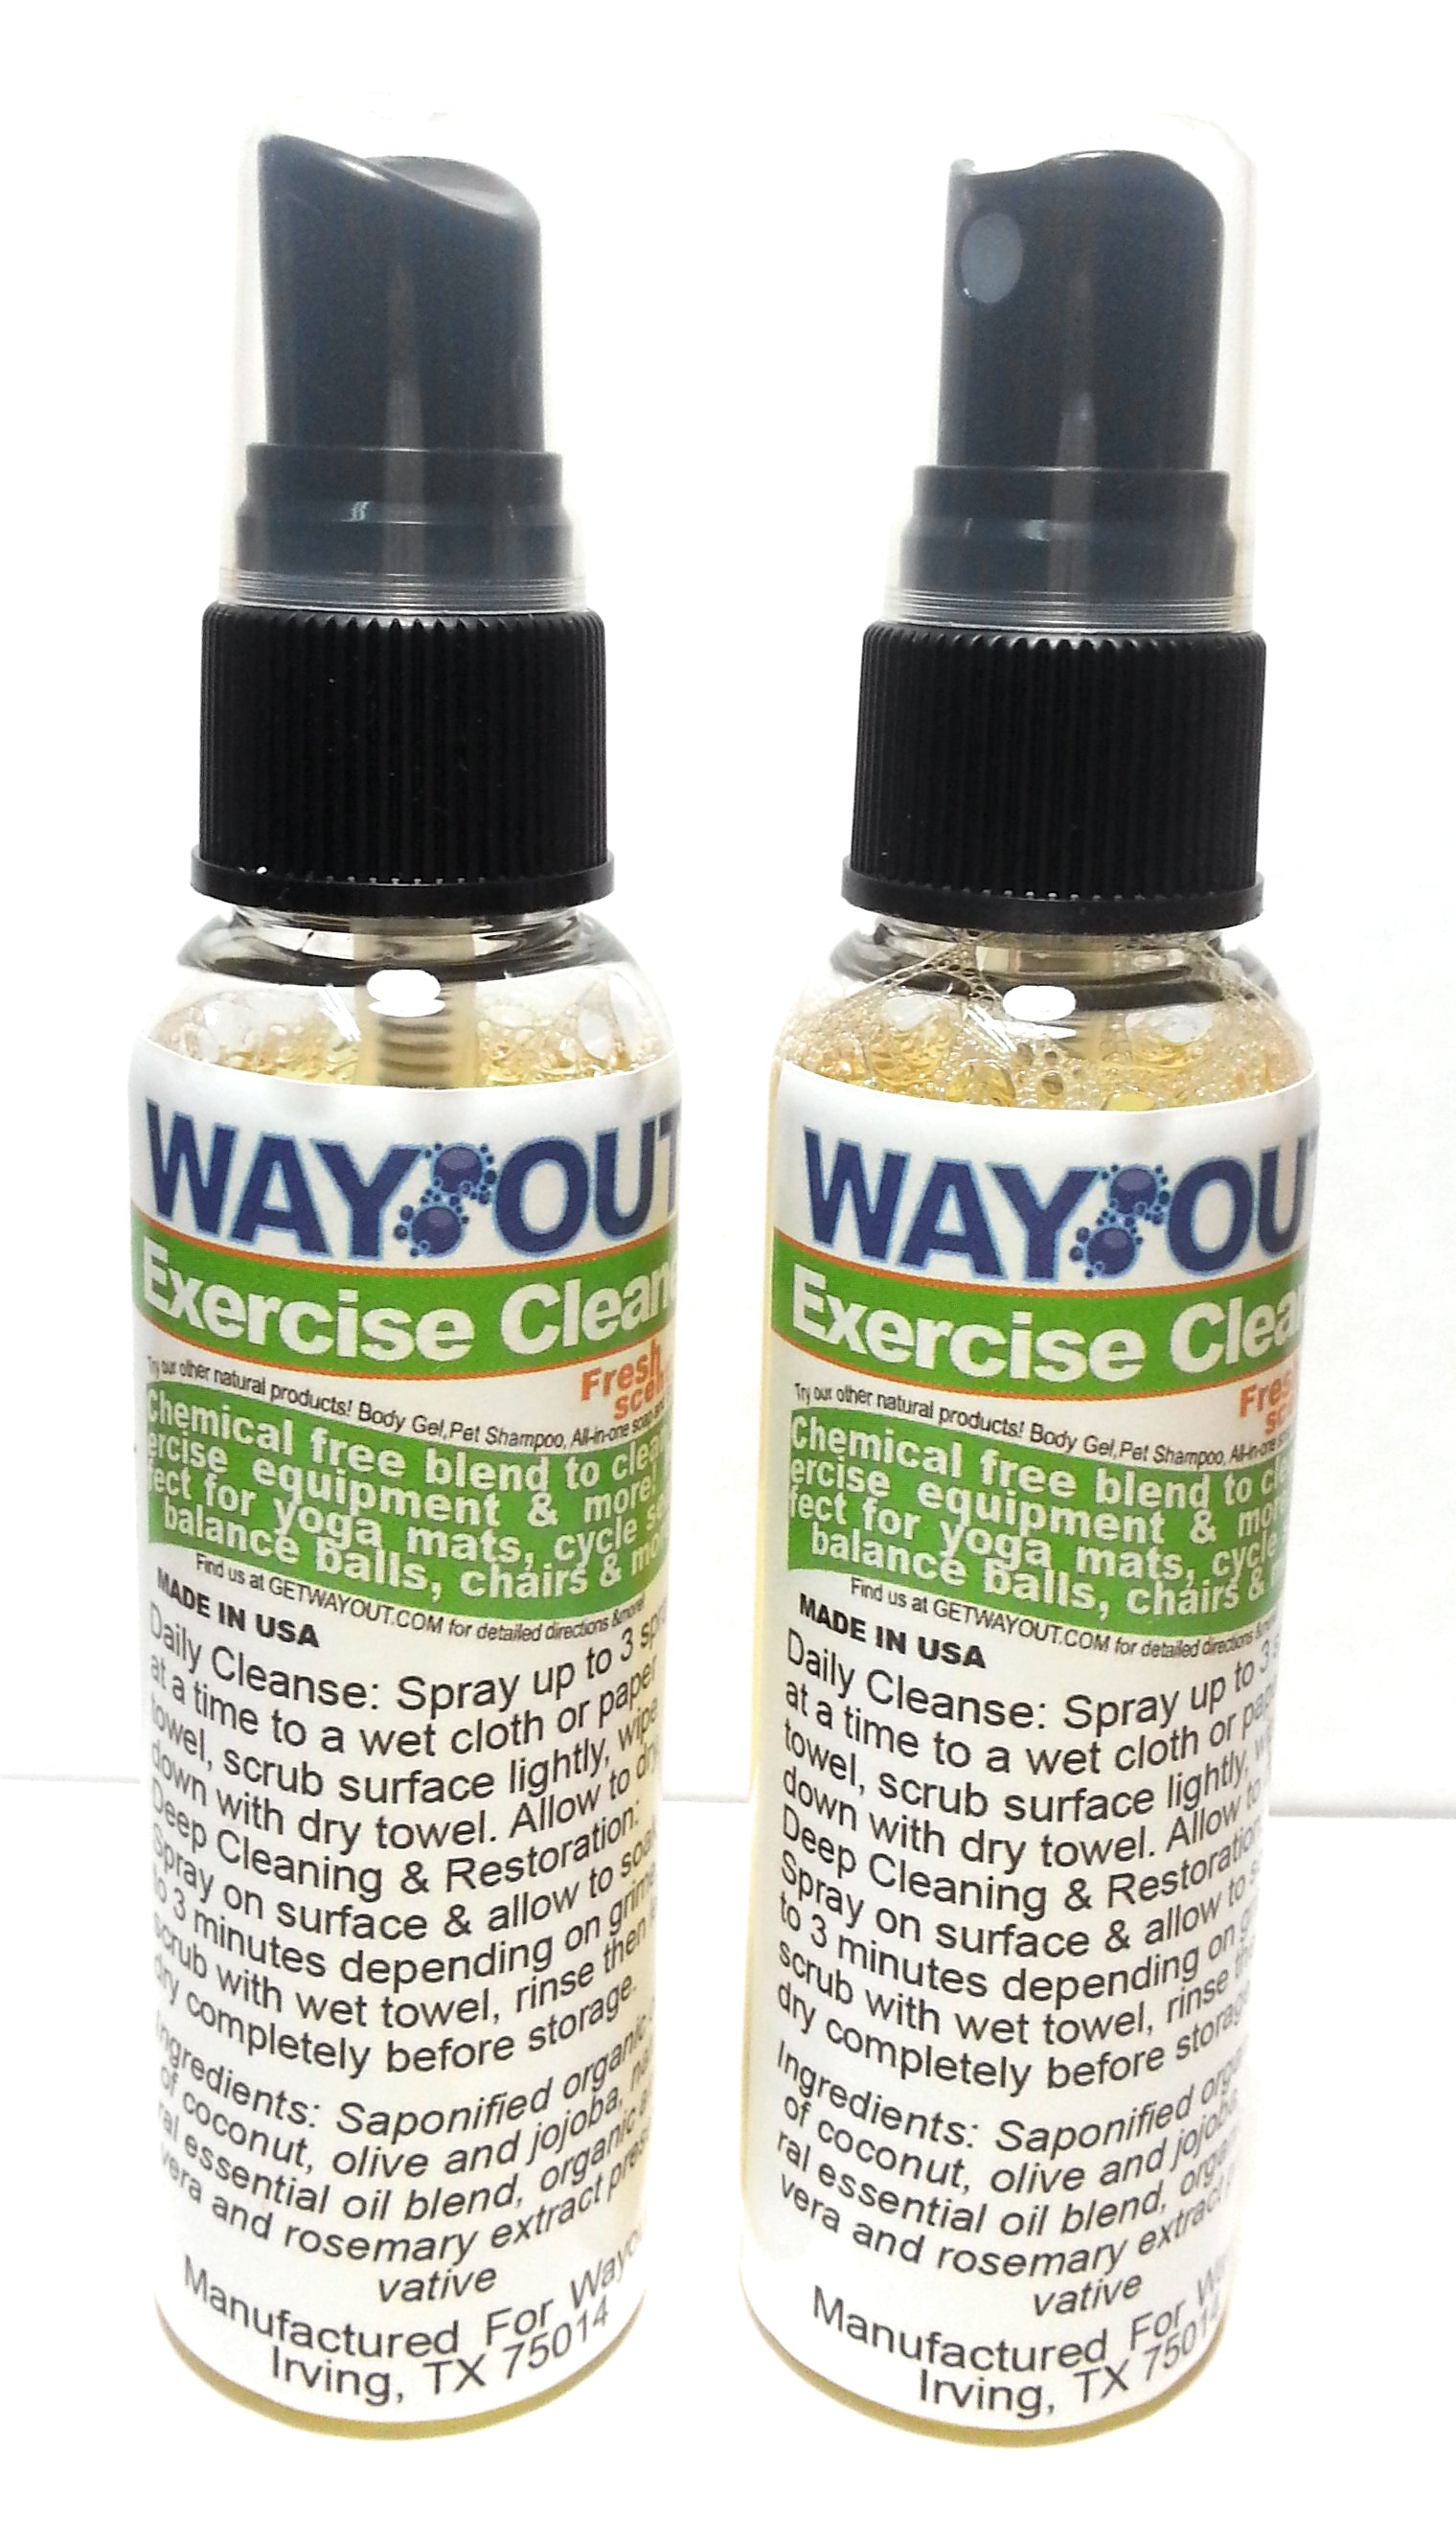 Wayout! Exercise Cleaning Spray Cleaner - 100% All-Natural with Essential Oils - 2 Count, 2 Ounce each